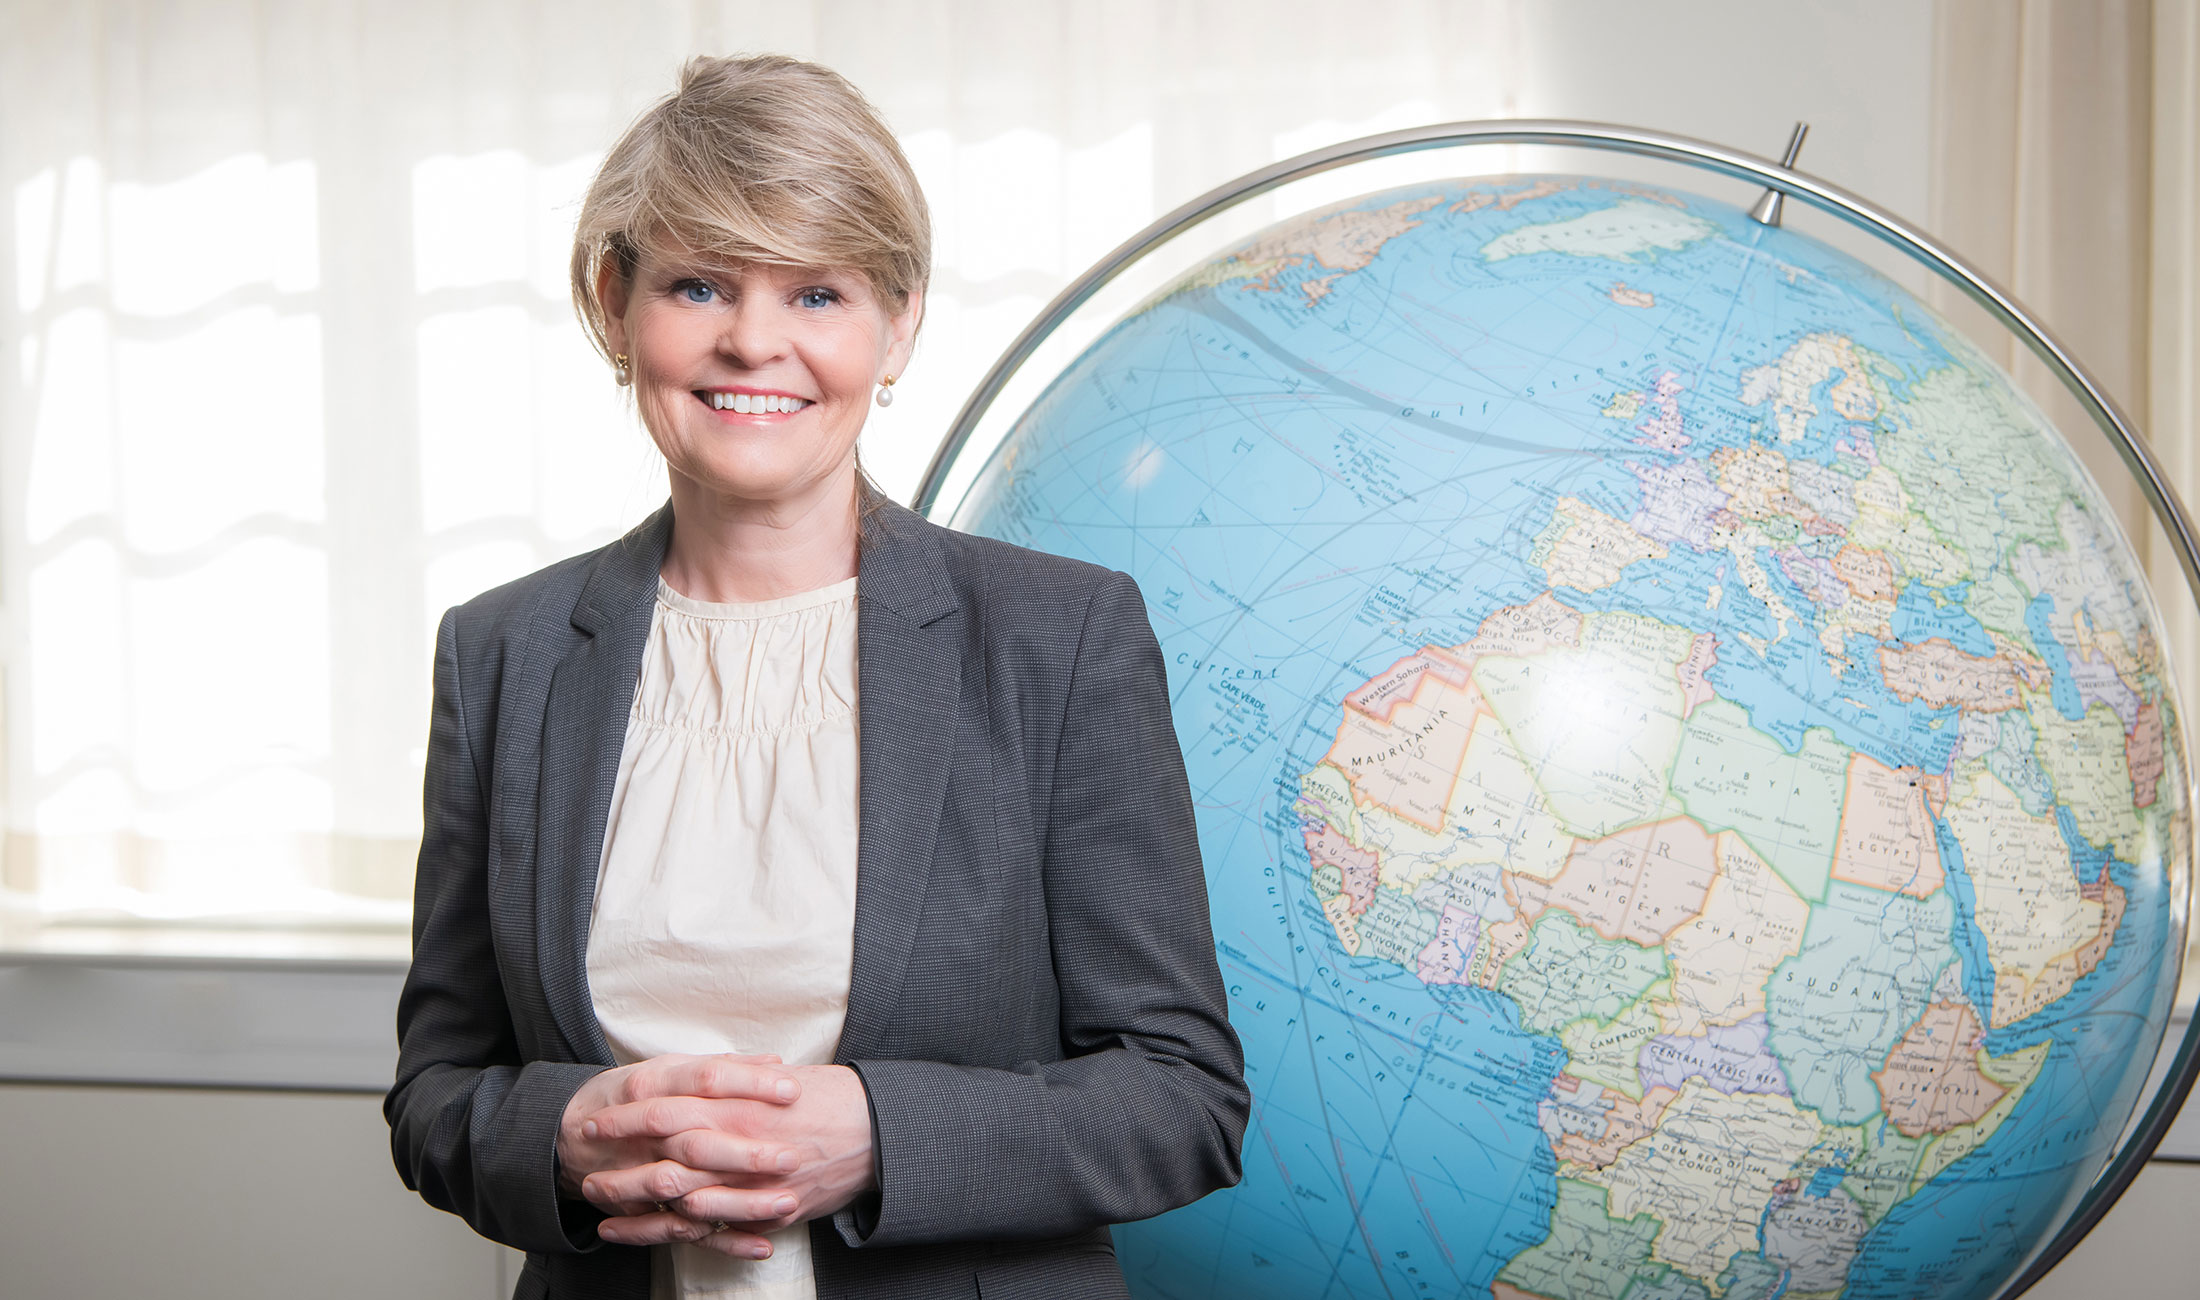 Lena Bertilsson in front of a globe.